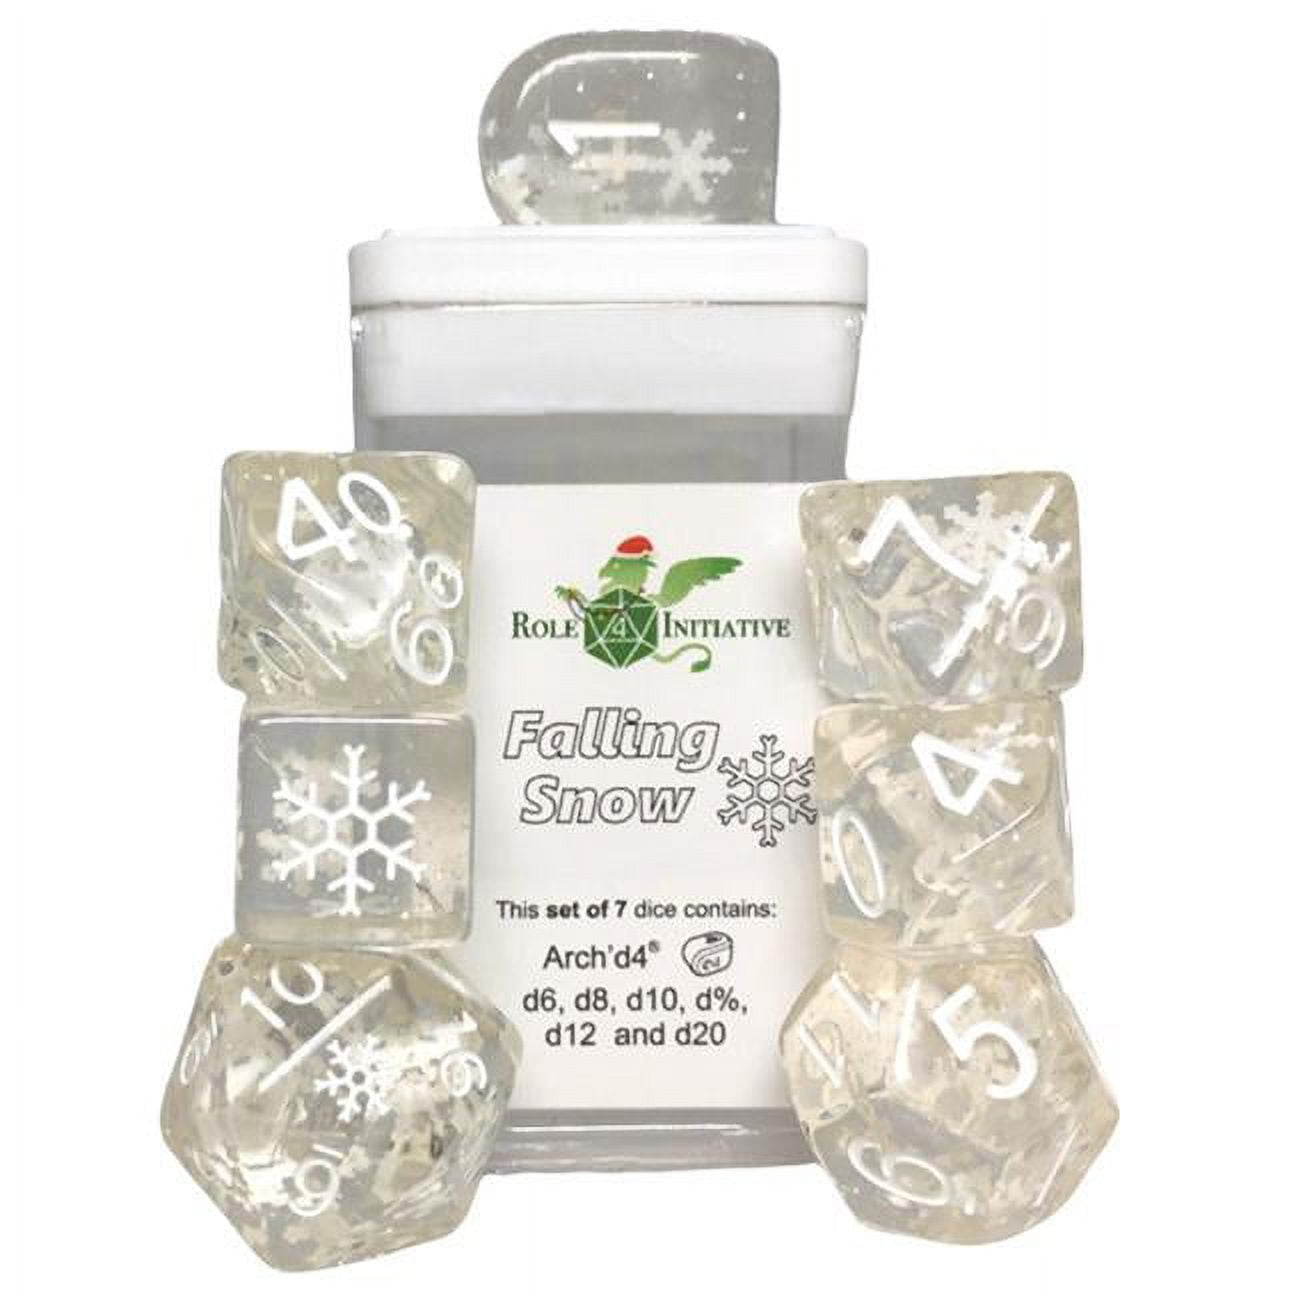 Picture of Role 4 Initiative R4I50904-7C Diffusion Falling Snow Dice - Set of 7